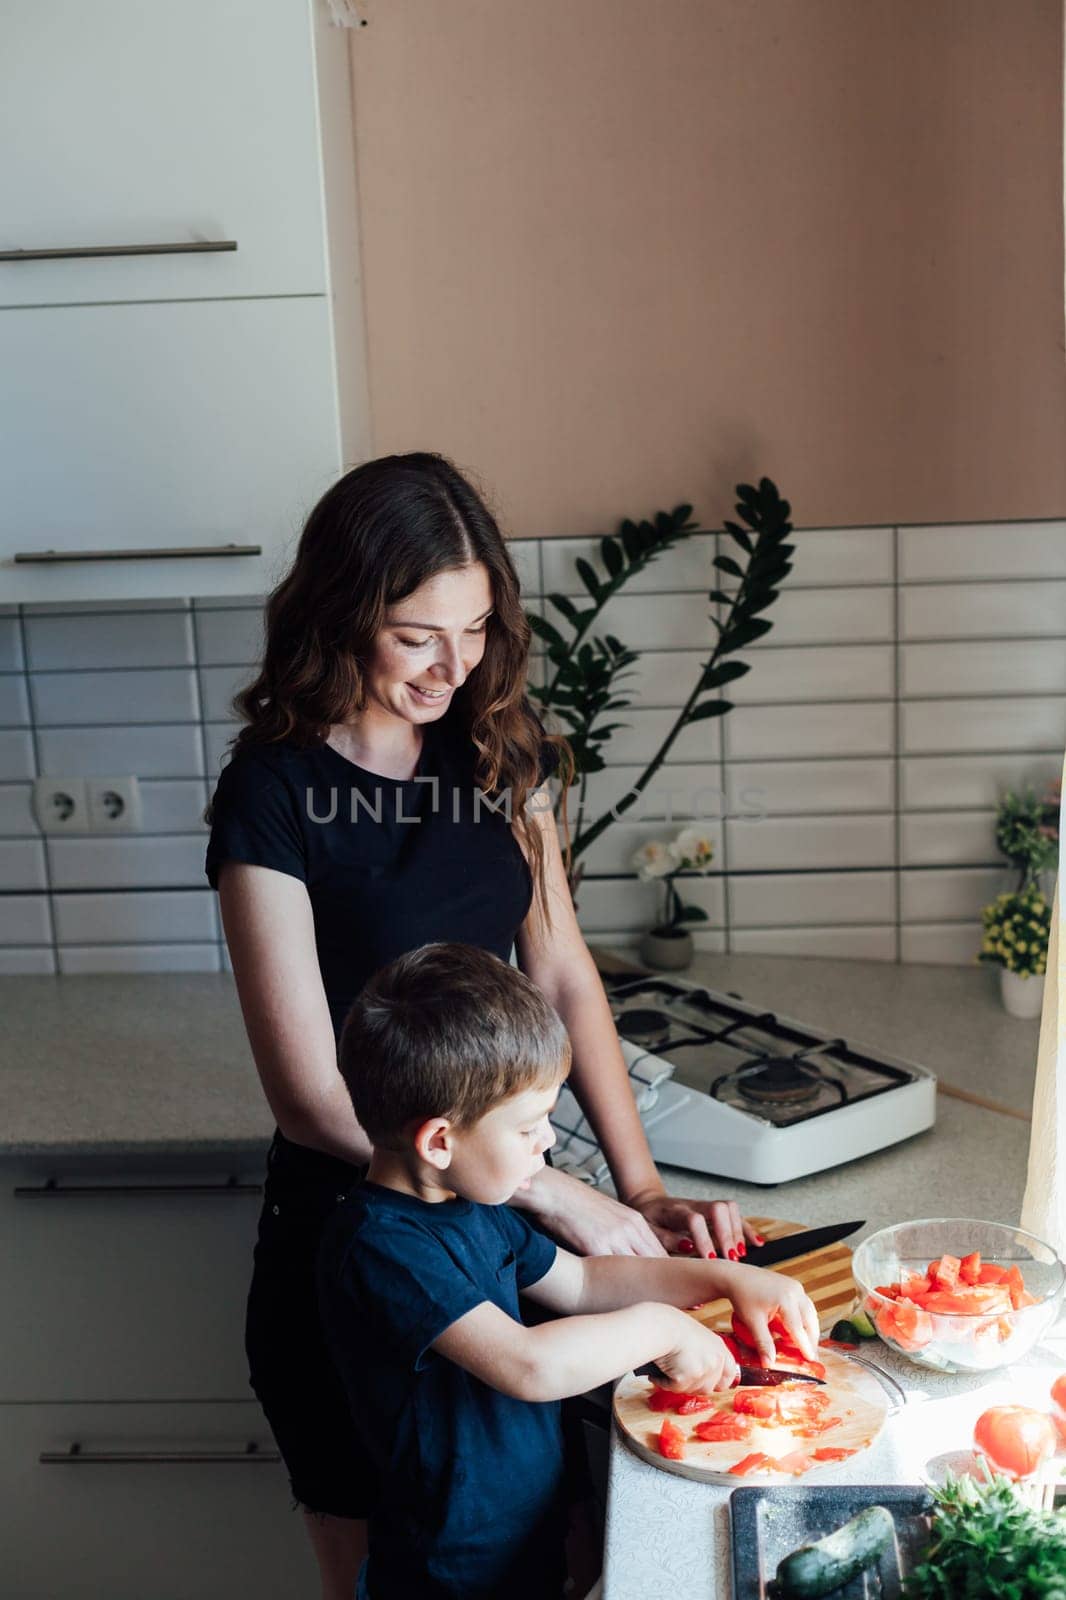 Mom and young son cut vegetables for salad in the kitchen by Simakov